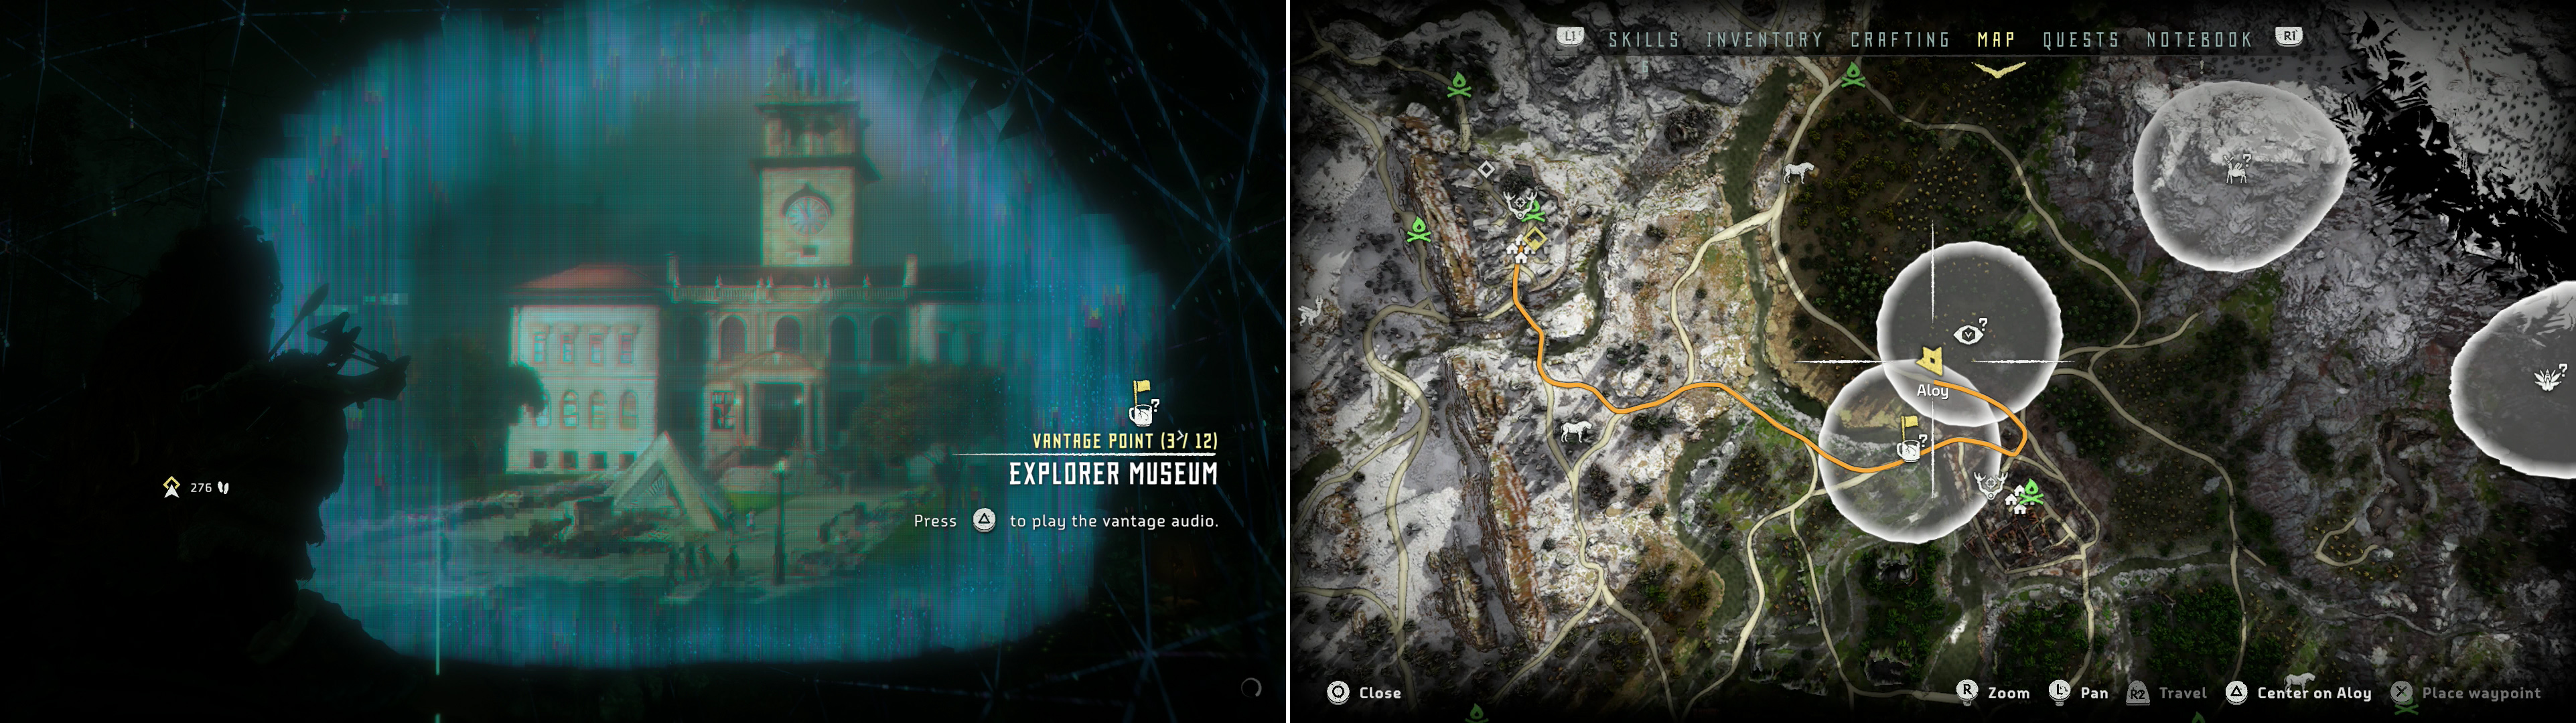 Scan the Vantage - Explorer Museum (left) near the Devil’s Thirst Bandit camp, at the location indicated on the map (right).